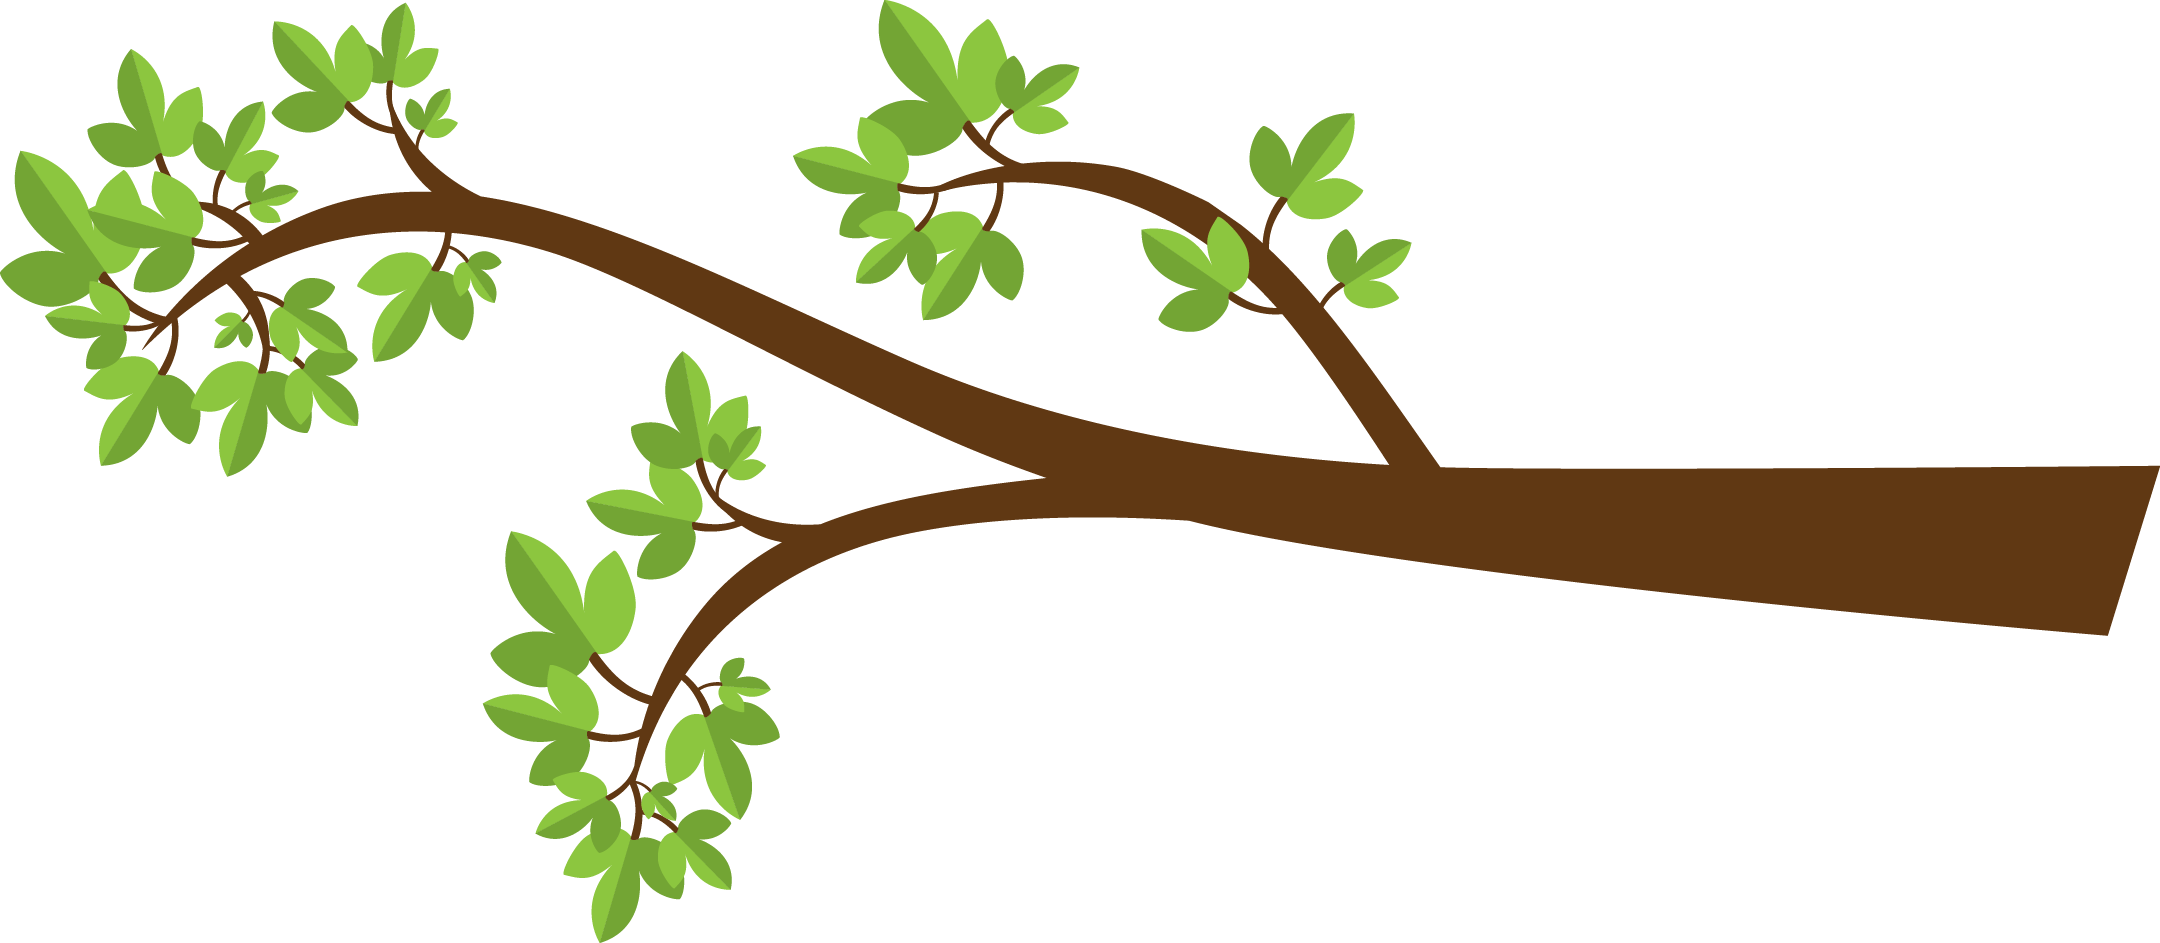 Tree branches clipart, Tree b